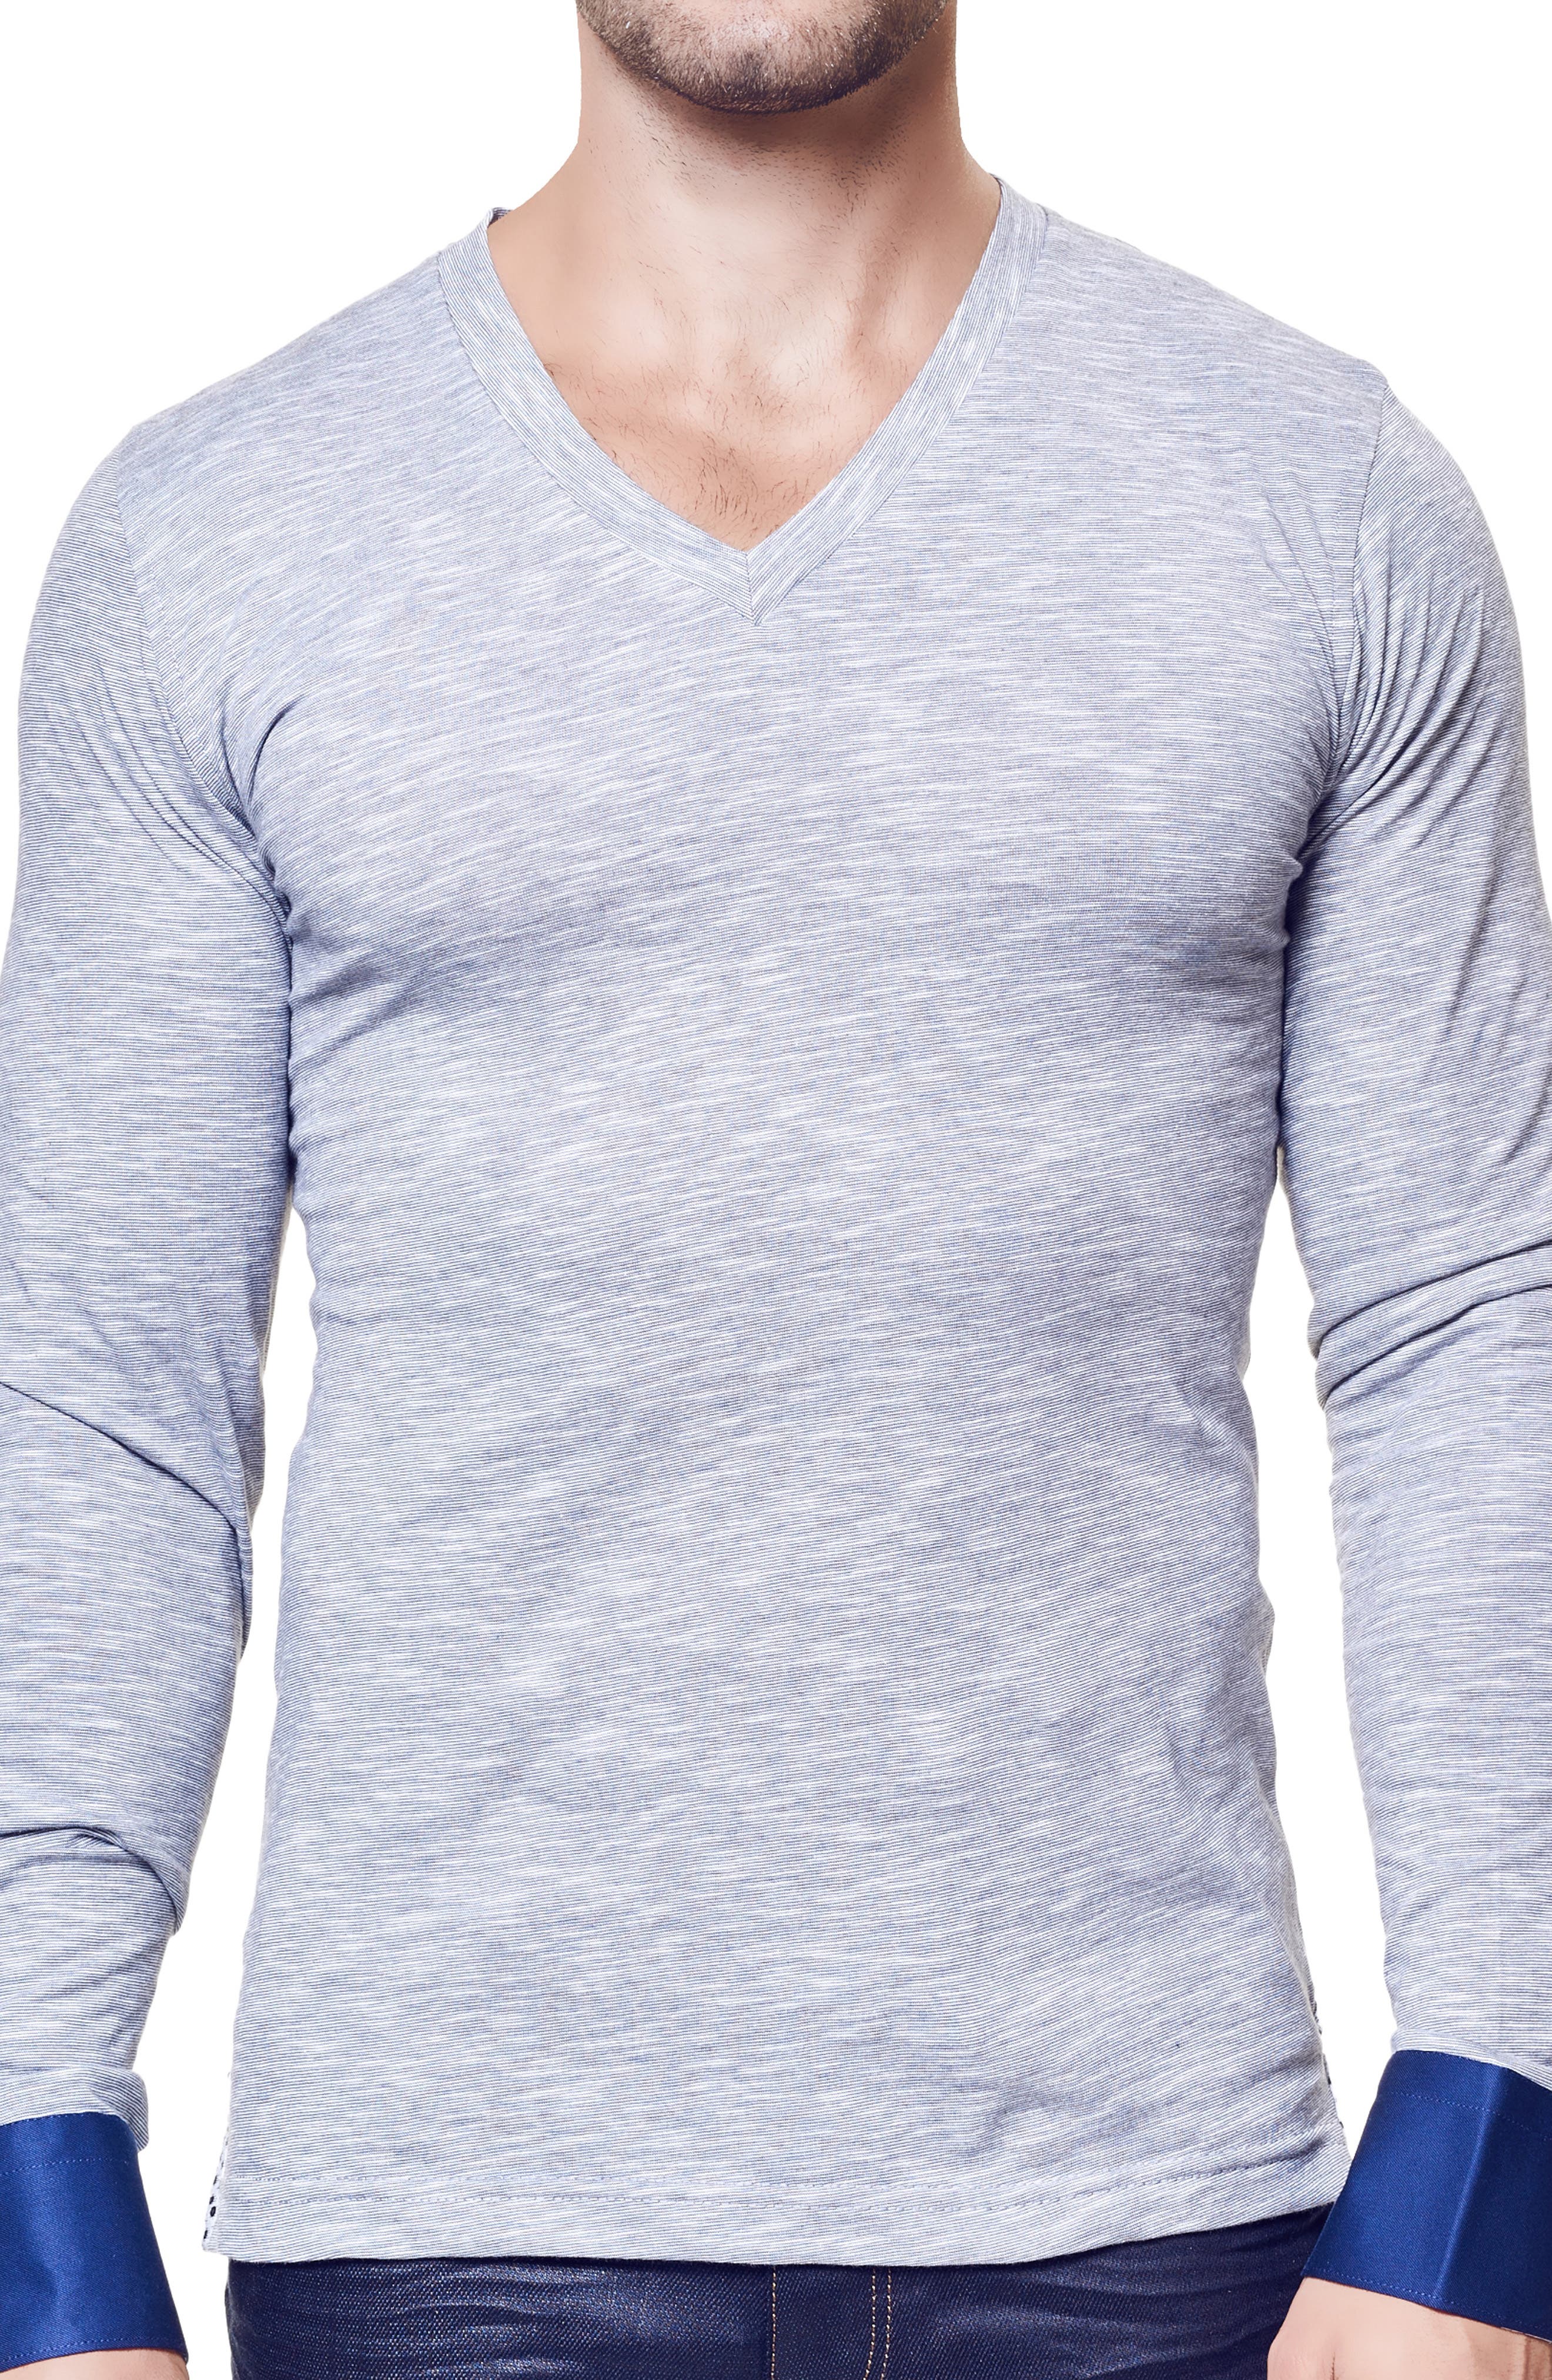 V-Neck 100% Cotton Lower East Long-Sleeved Mens Shirts Pack of 5